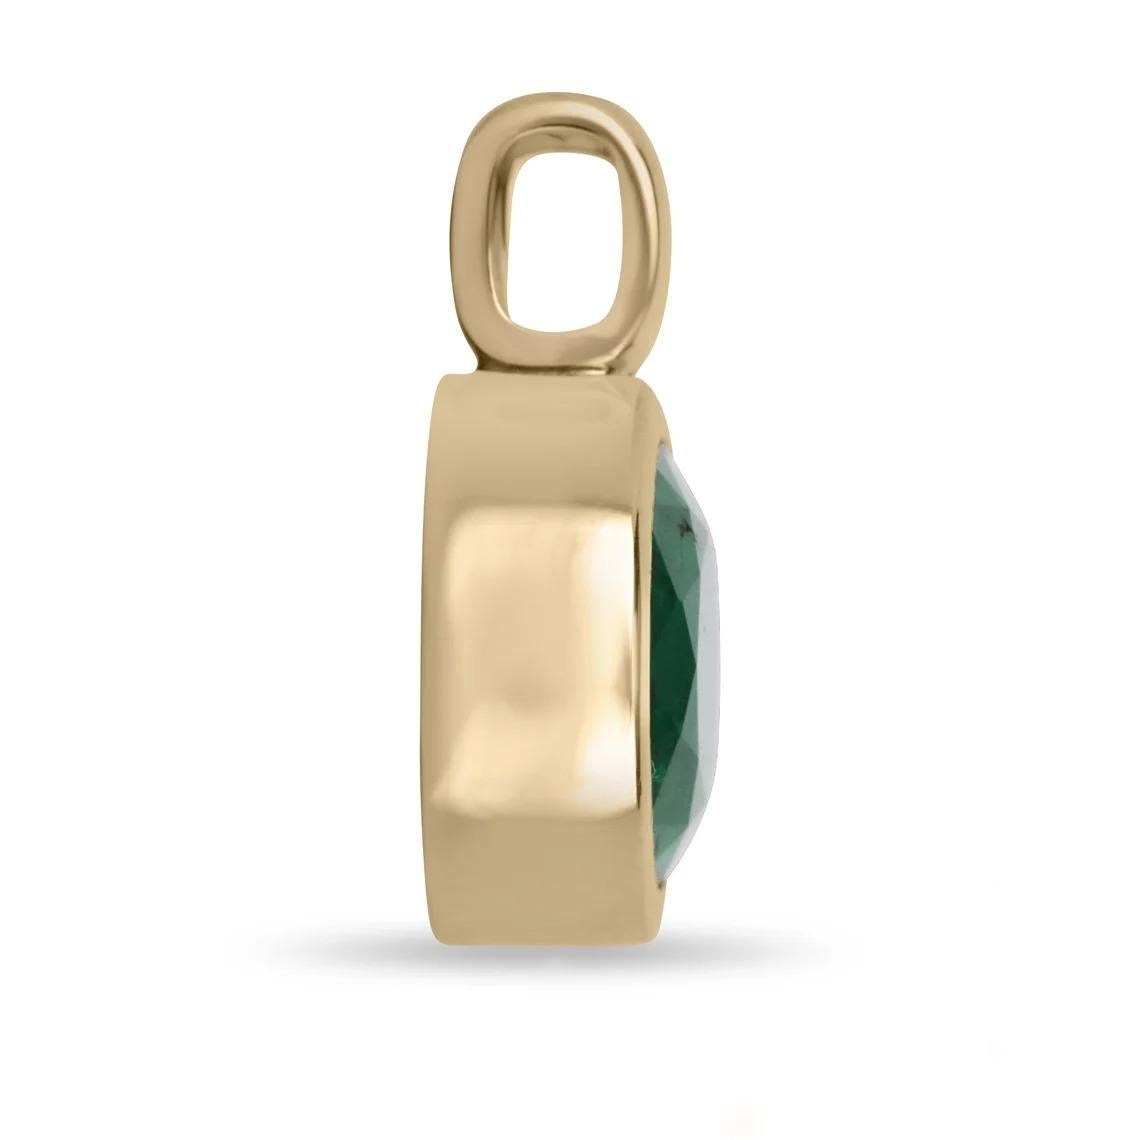 This beautiful solitaire pendant showcases a stunning dark green oval-cut emerald that is expertly bezel set in 14k gold. The simplicity of the design highlights the natural beauty and elegance of the emerald, making it a timeless and sophisticated